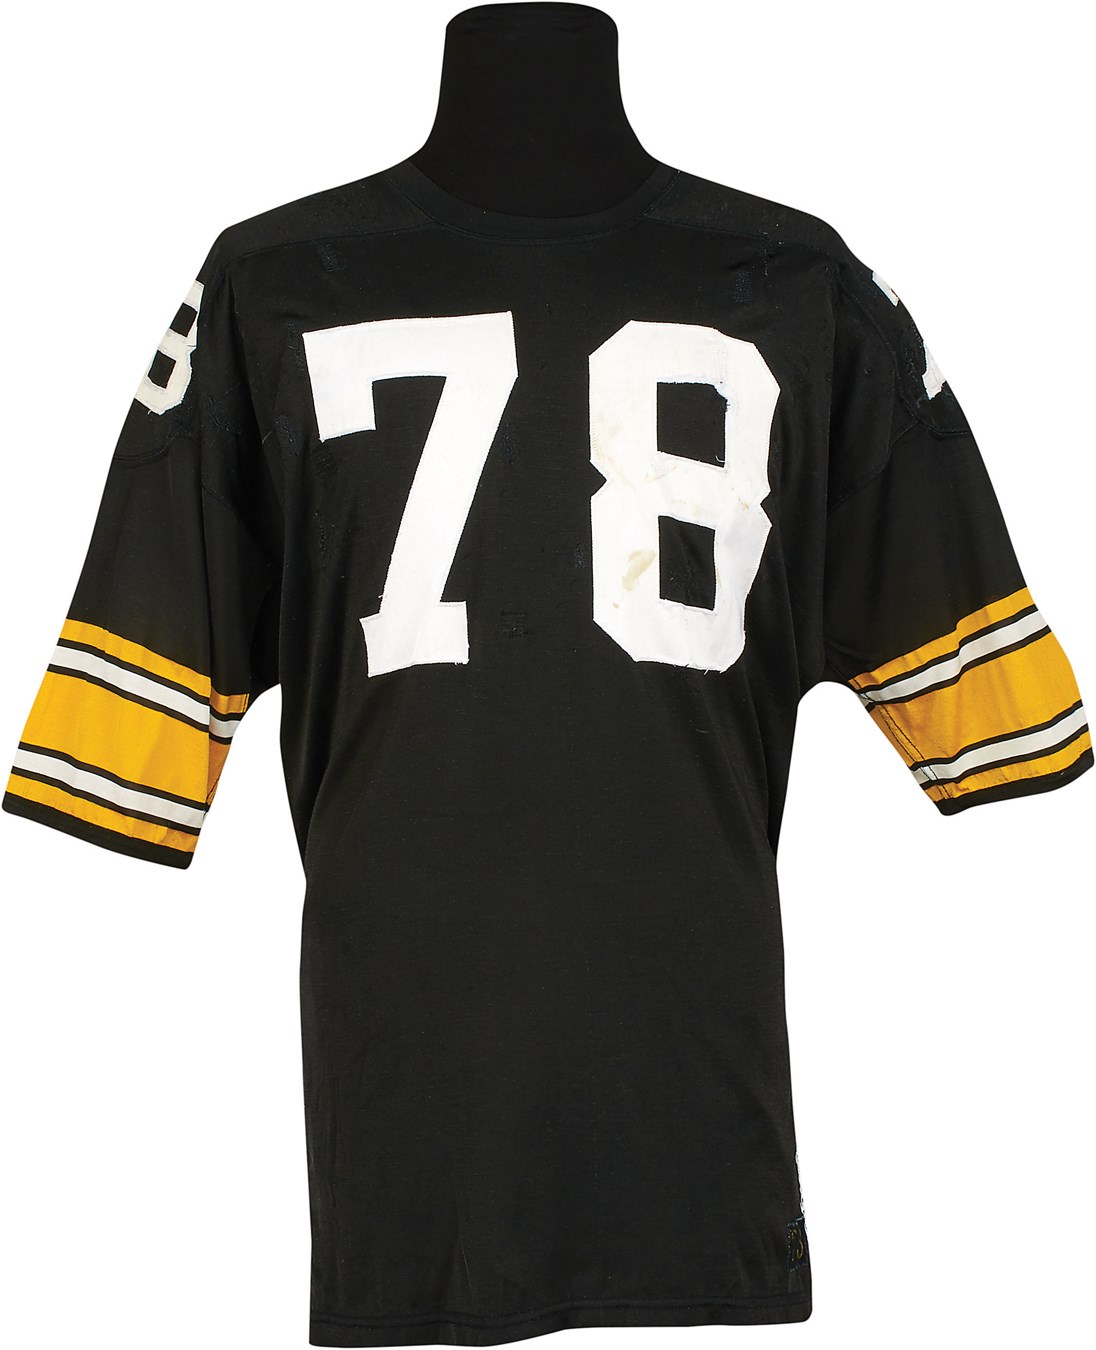 - 1973 Dwight White Pittsburgh Steelers Game Worn Jersey (Photomatched)